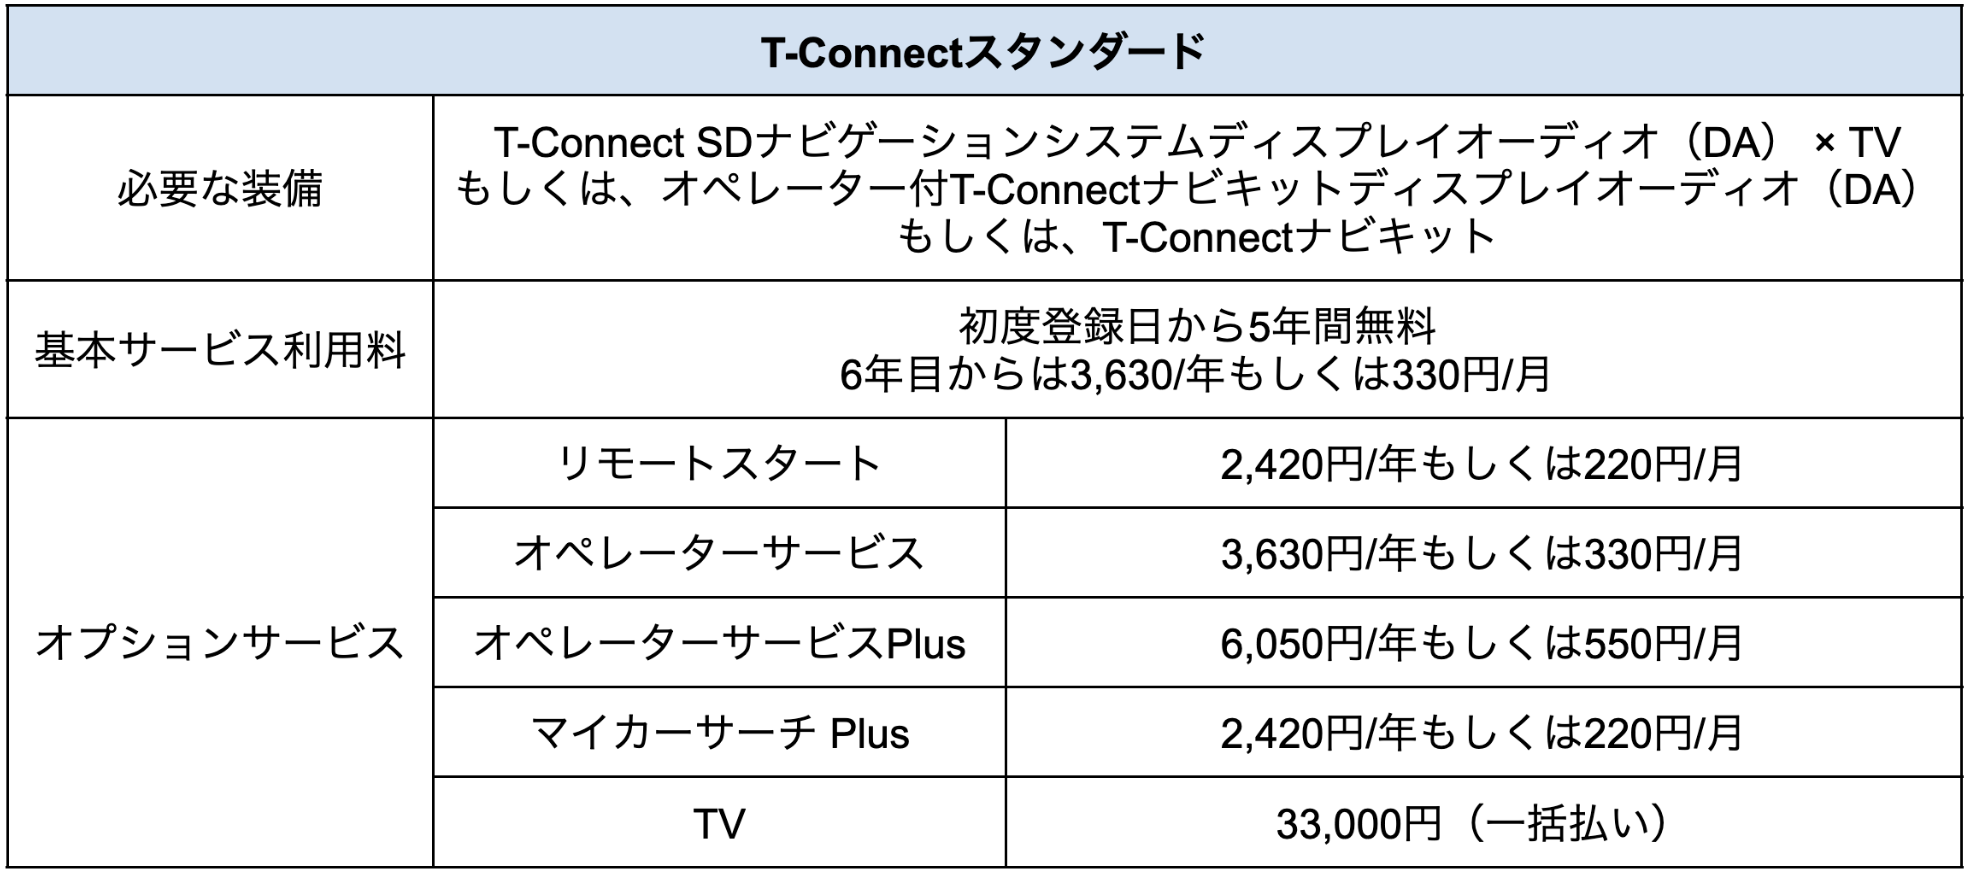 T-Connectスタンダード